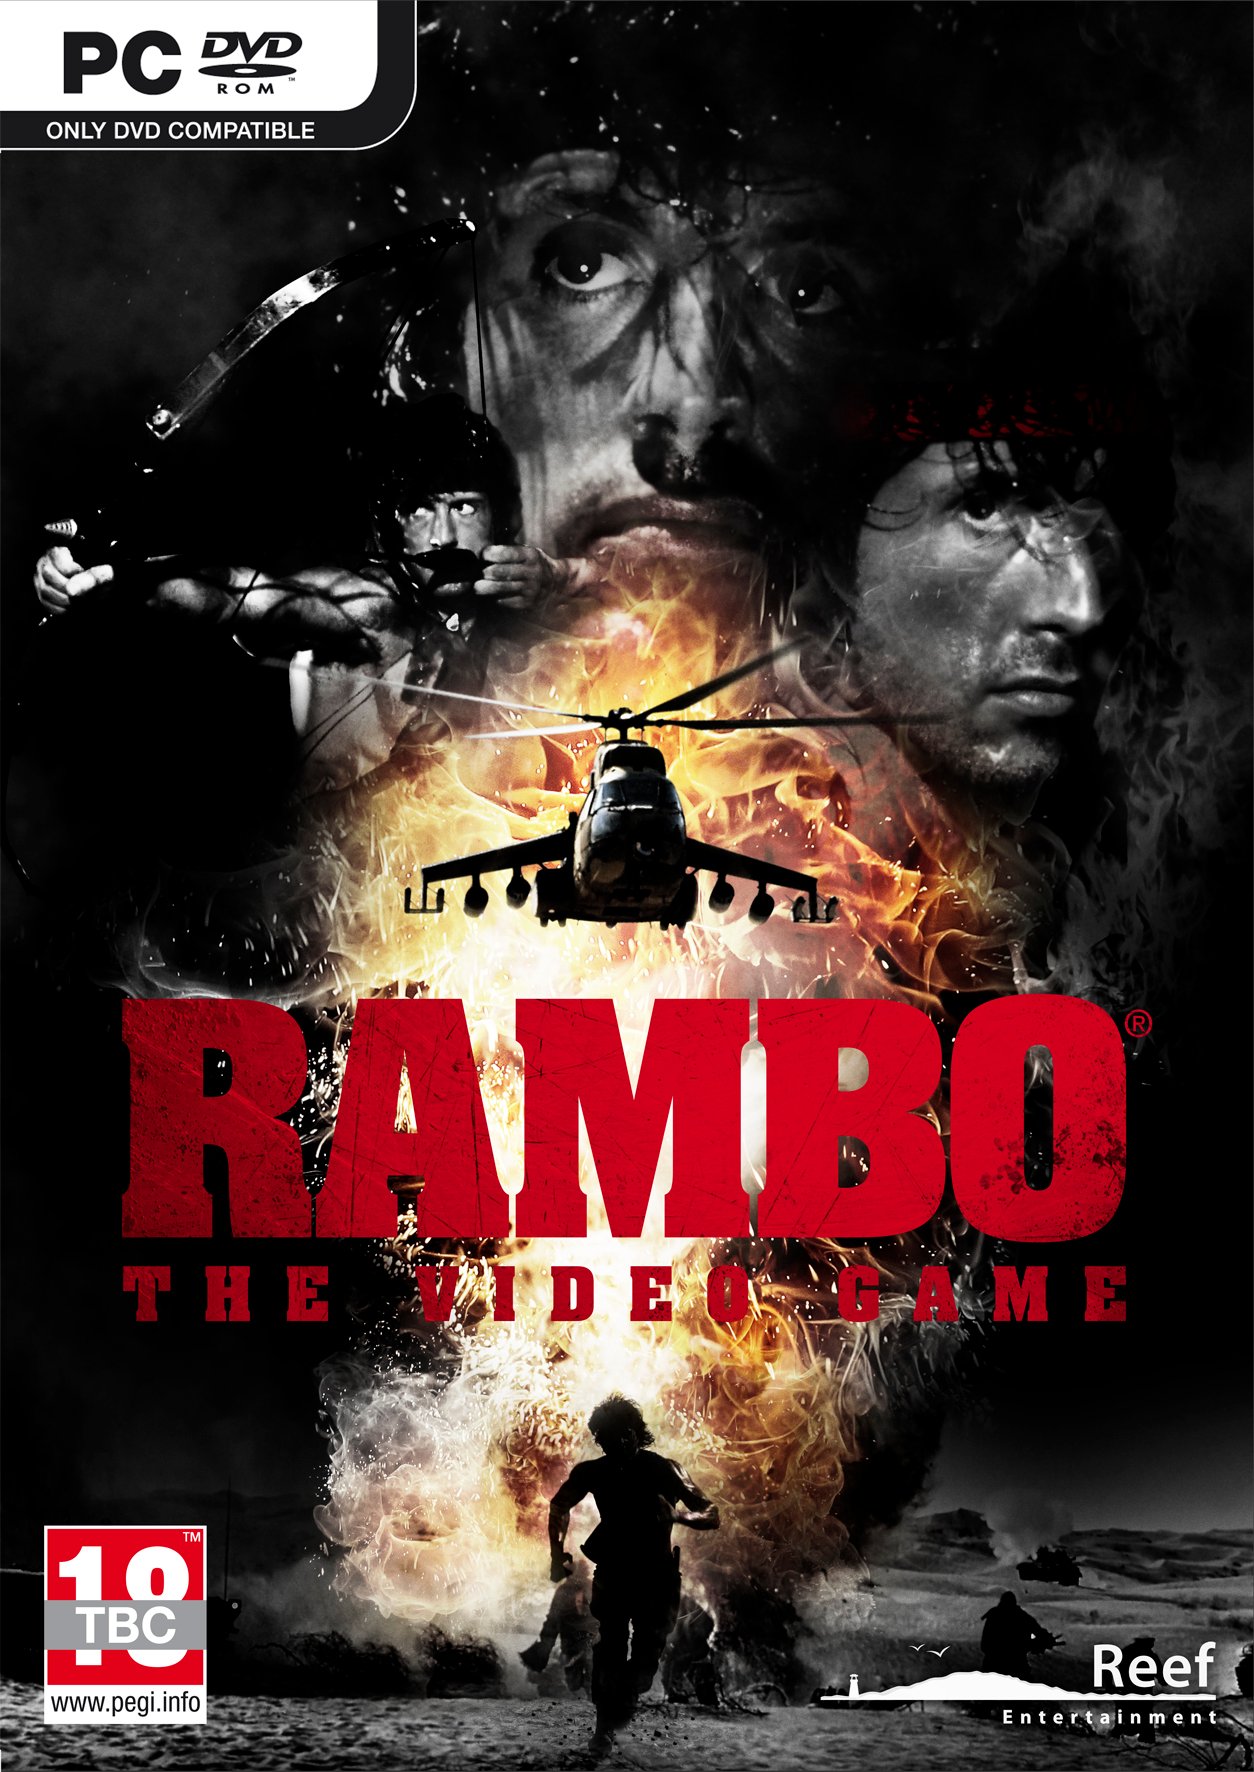 free download rambo video game ps4